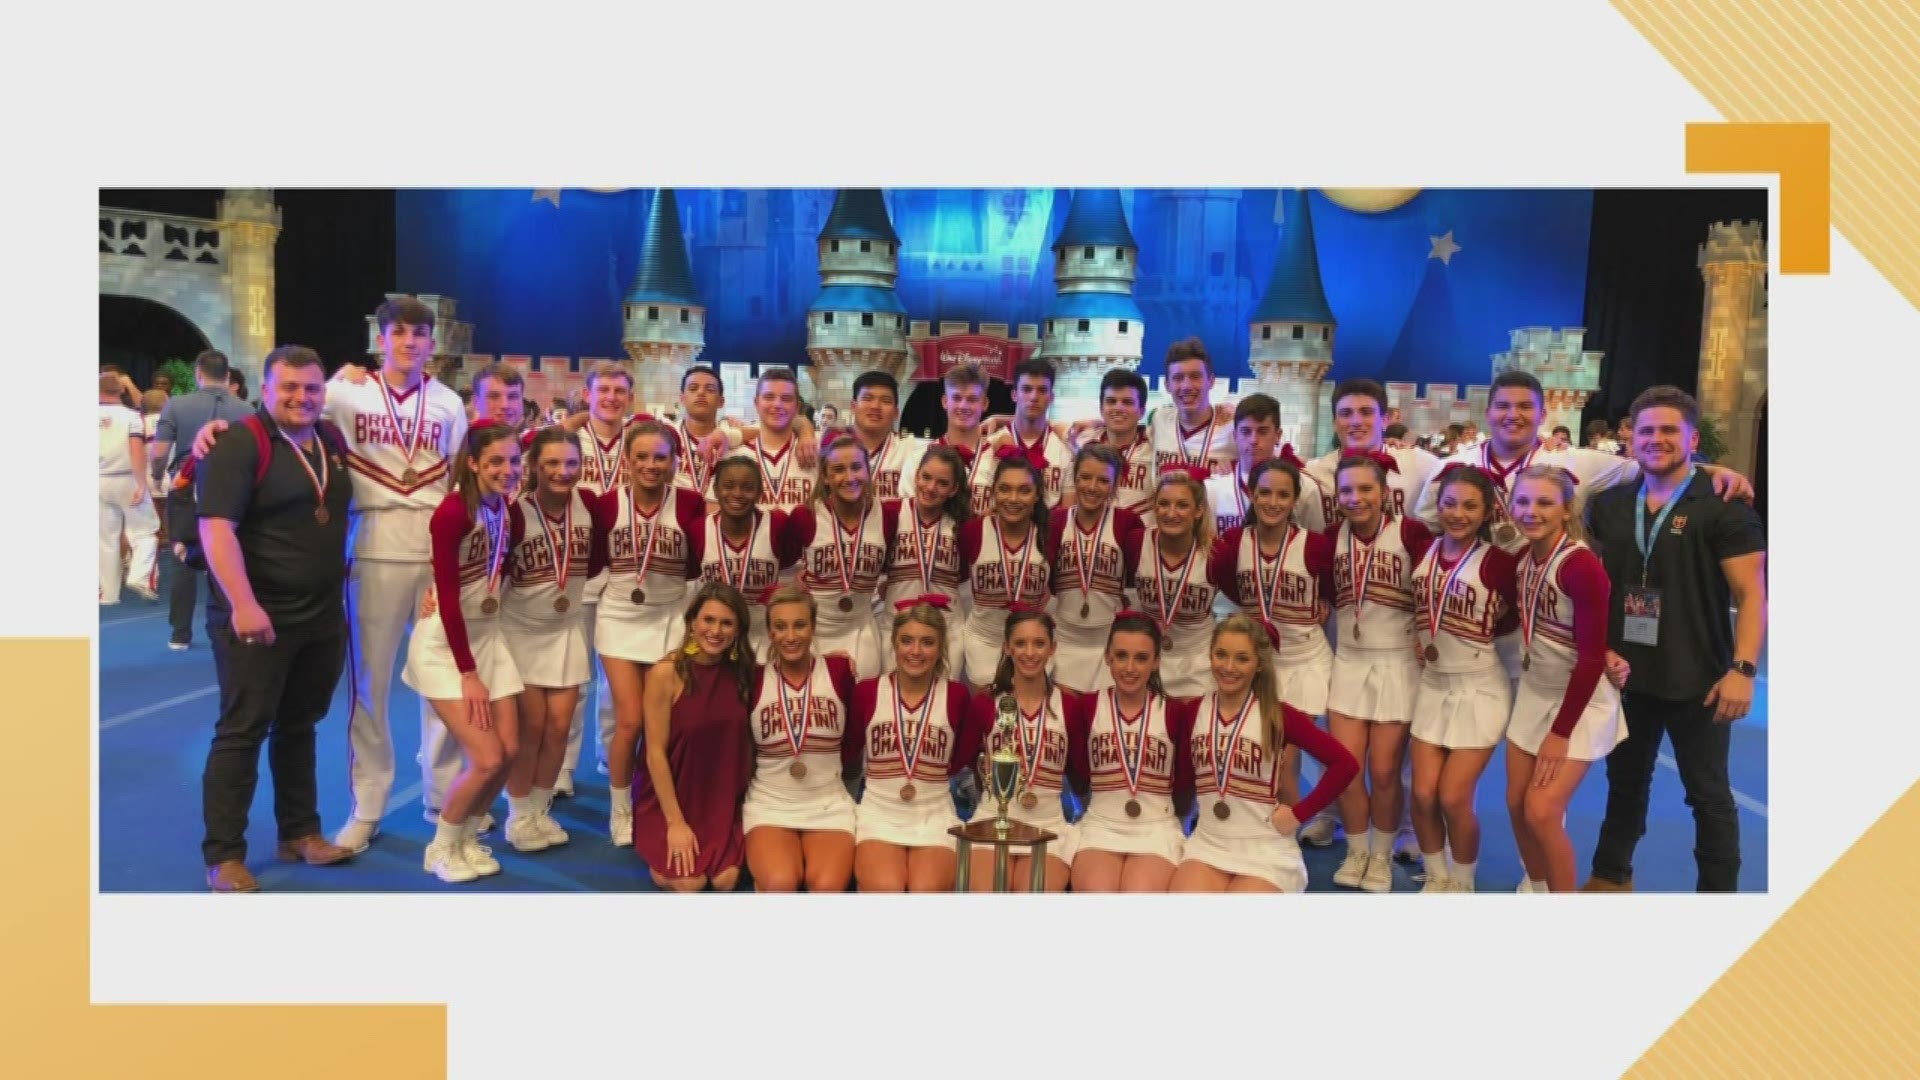 Congratulations to the Brother Martin High School Cheer Team who recently placed third in the UCA National Cheerleading Competition in Orlando!